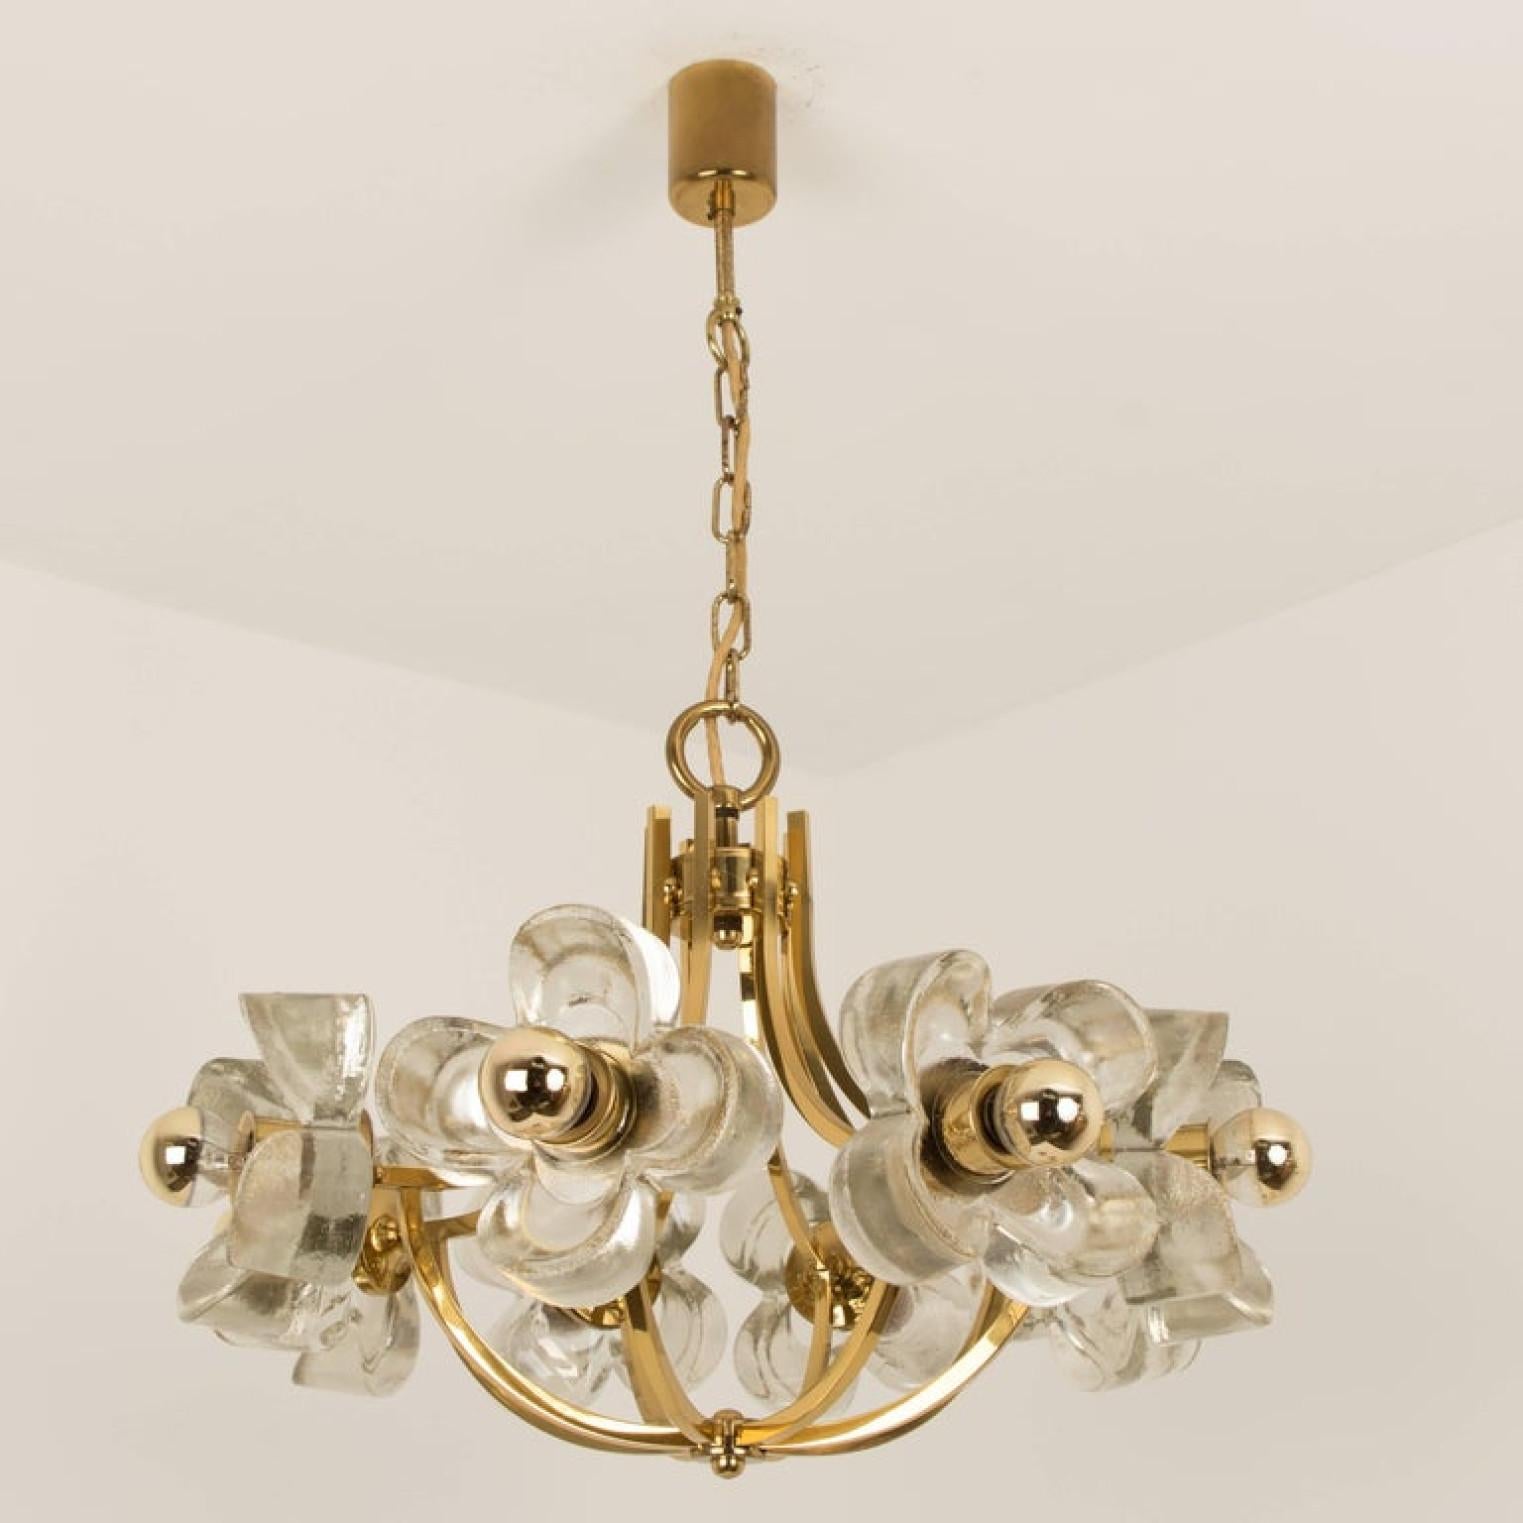 Other 1 of the 2 Sische Glass and Brass Chandelier, 1960s Modernist Design, Kalmar Sty For Sale